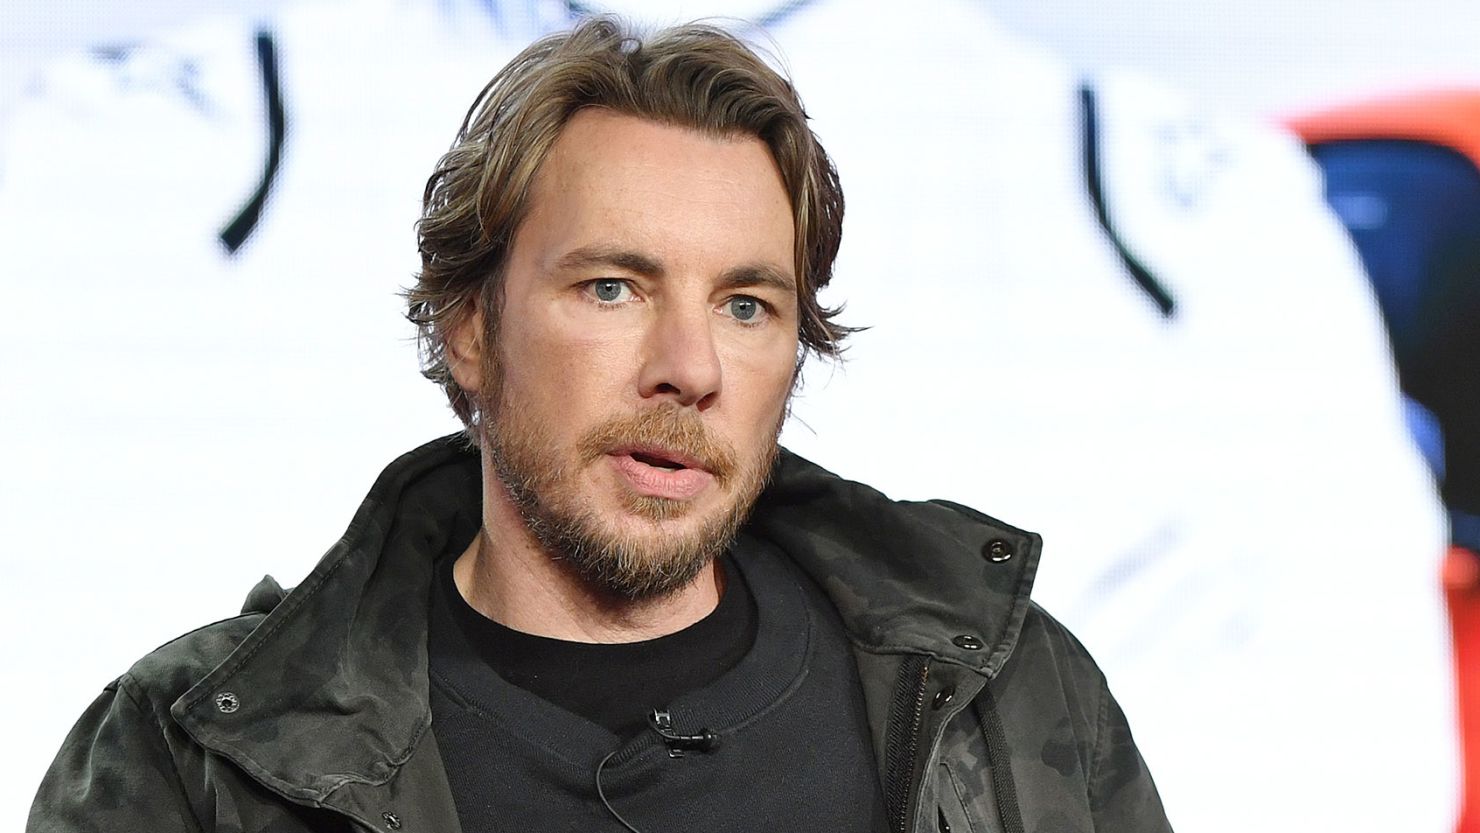 Dax Shepard of "Top Gear America" during an event in Pasadena, California, early this year.